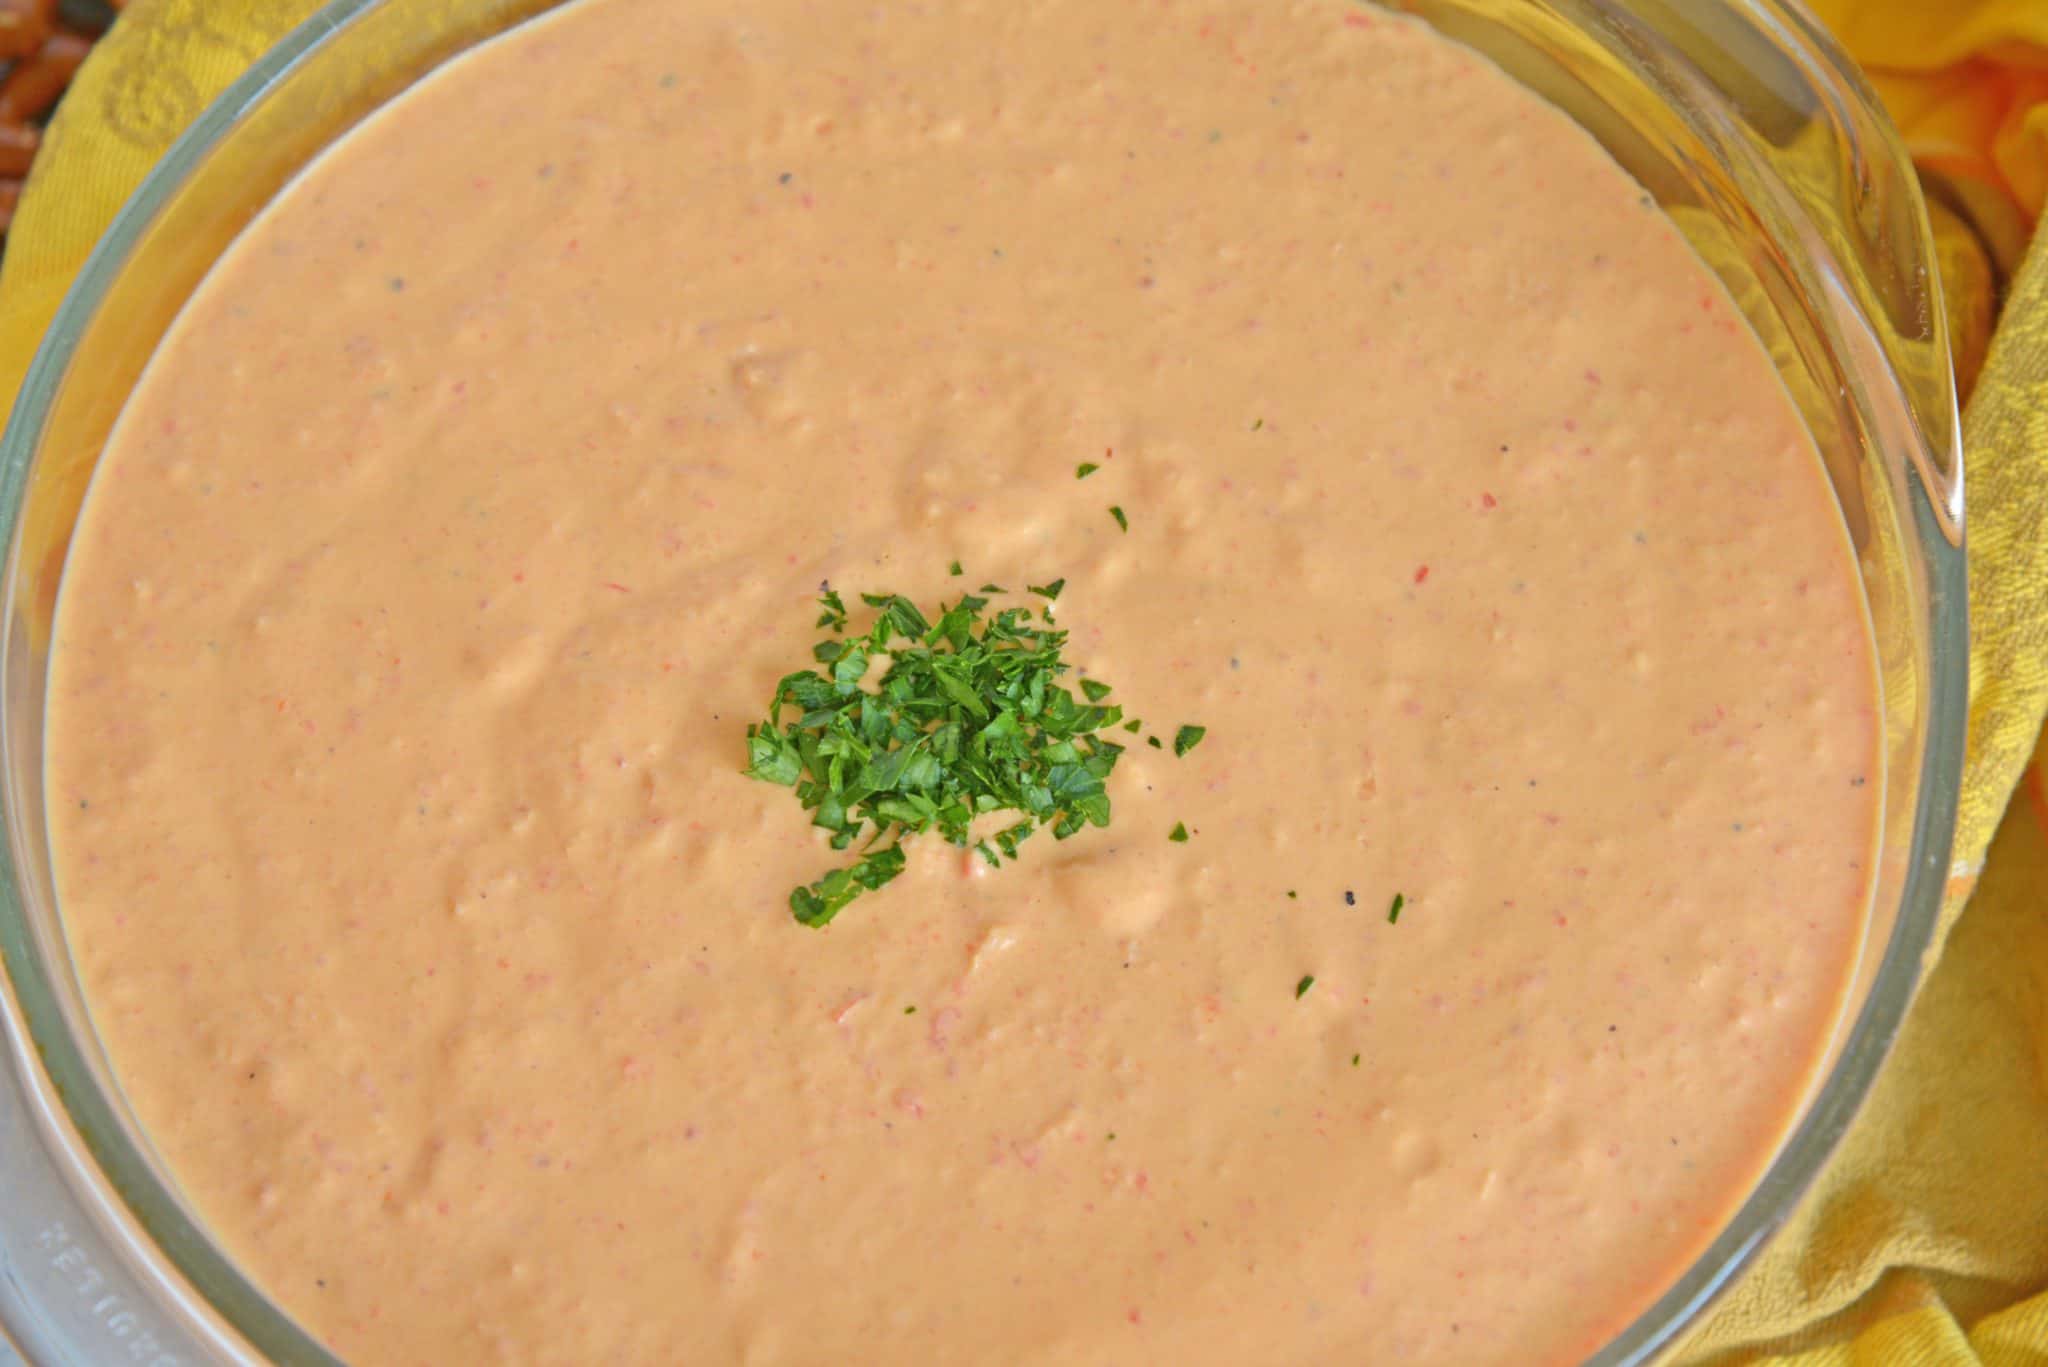 Roasted Red Pepper Dip is tangy, light, and irresistibly delicious. Served warm or cold, it is perfect for parties or an afternoon snack. #roastedredpepperdip #chipdip #roastedredpepper www.savoryexperiments.com